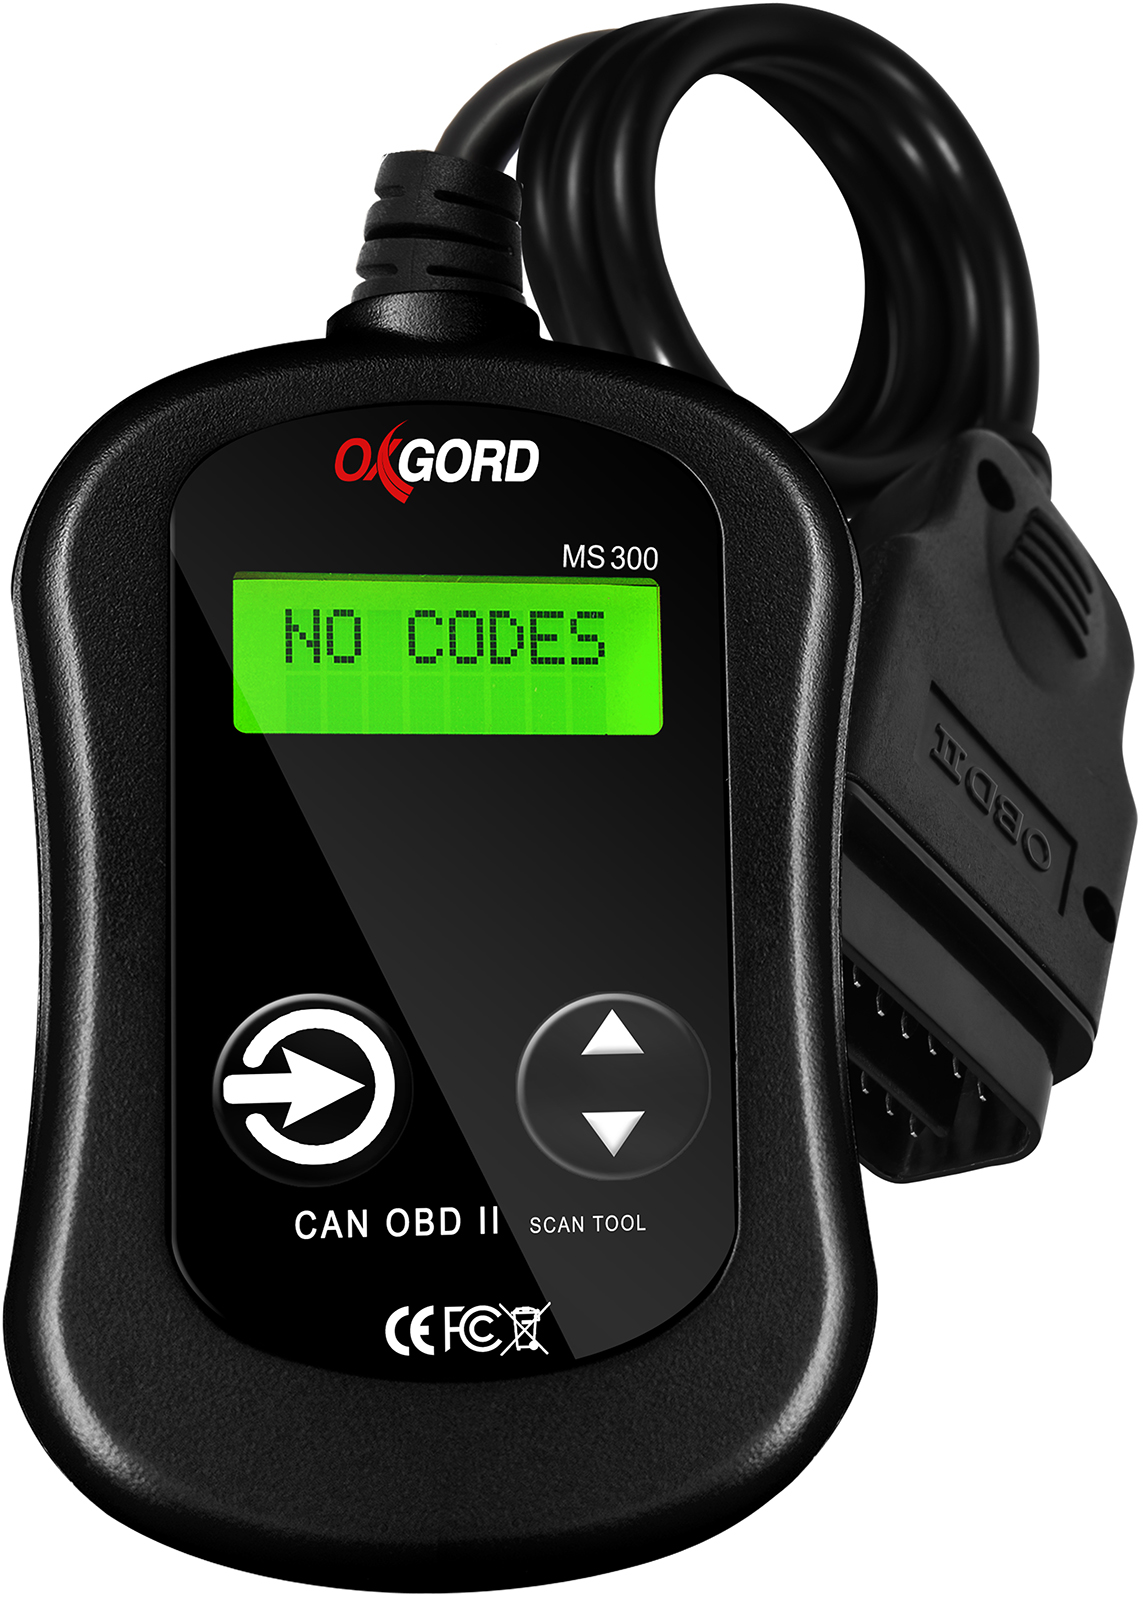 OxGord OBDII Engine Scanner OBD2 Tool MS300 Direct Scan and Read Out - image 1 of 2